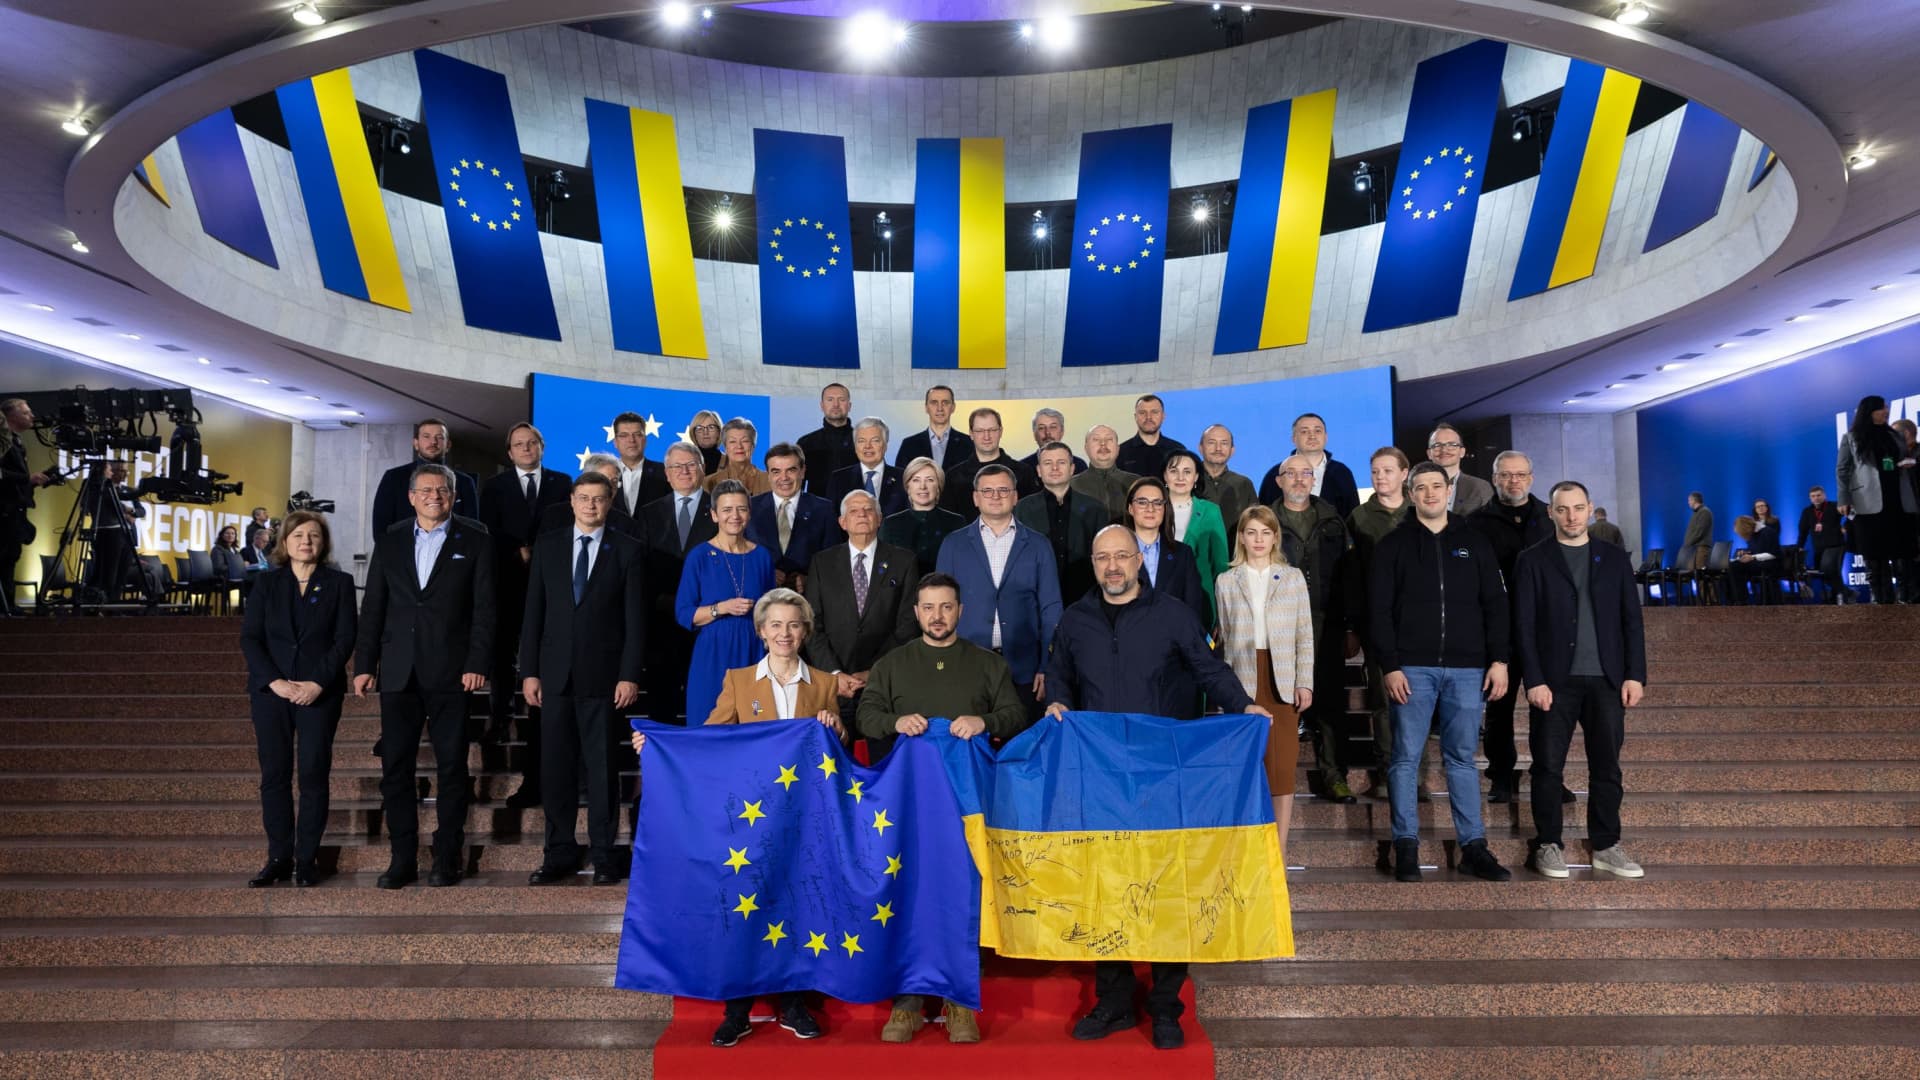 Ukrainian President Volodymyr Zelenskyy (center) and European Commission President Ursula von der Leyen (left) pose for a photo with Ukrainian and European Union flags after their meeting in Kyiv, Ukraine on Feb. 2, 2023.